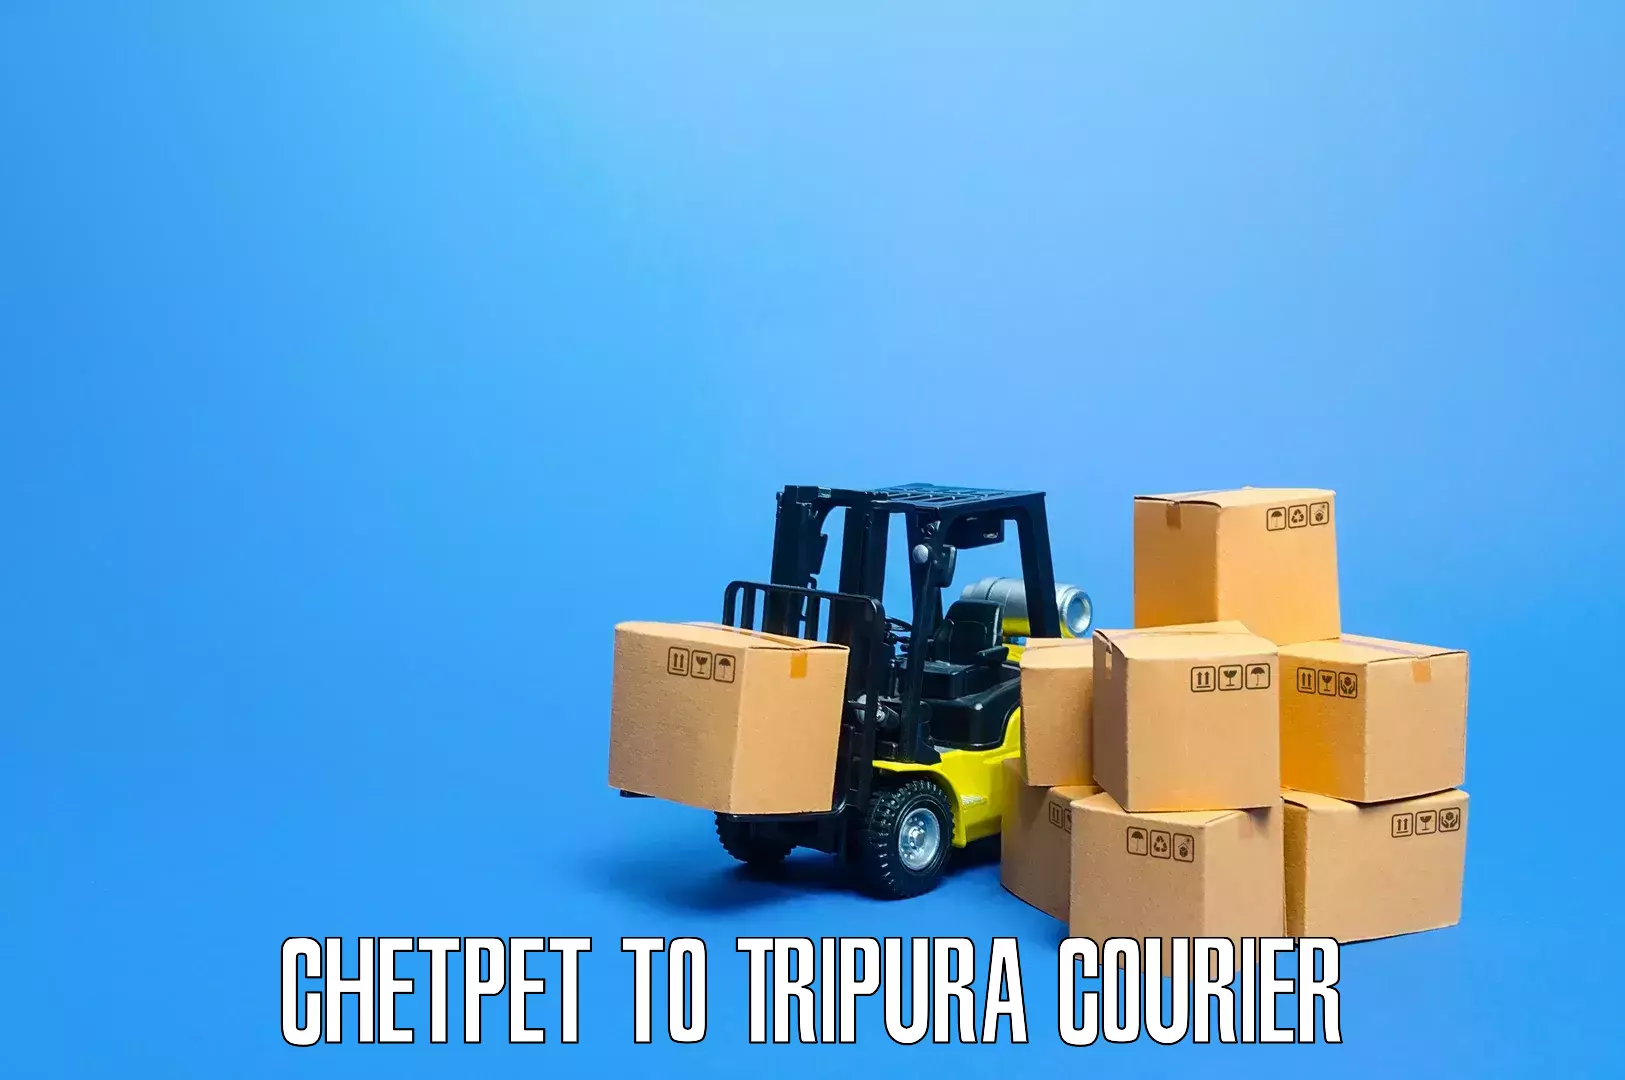 Residential moving experts Chetpet to Teliamura